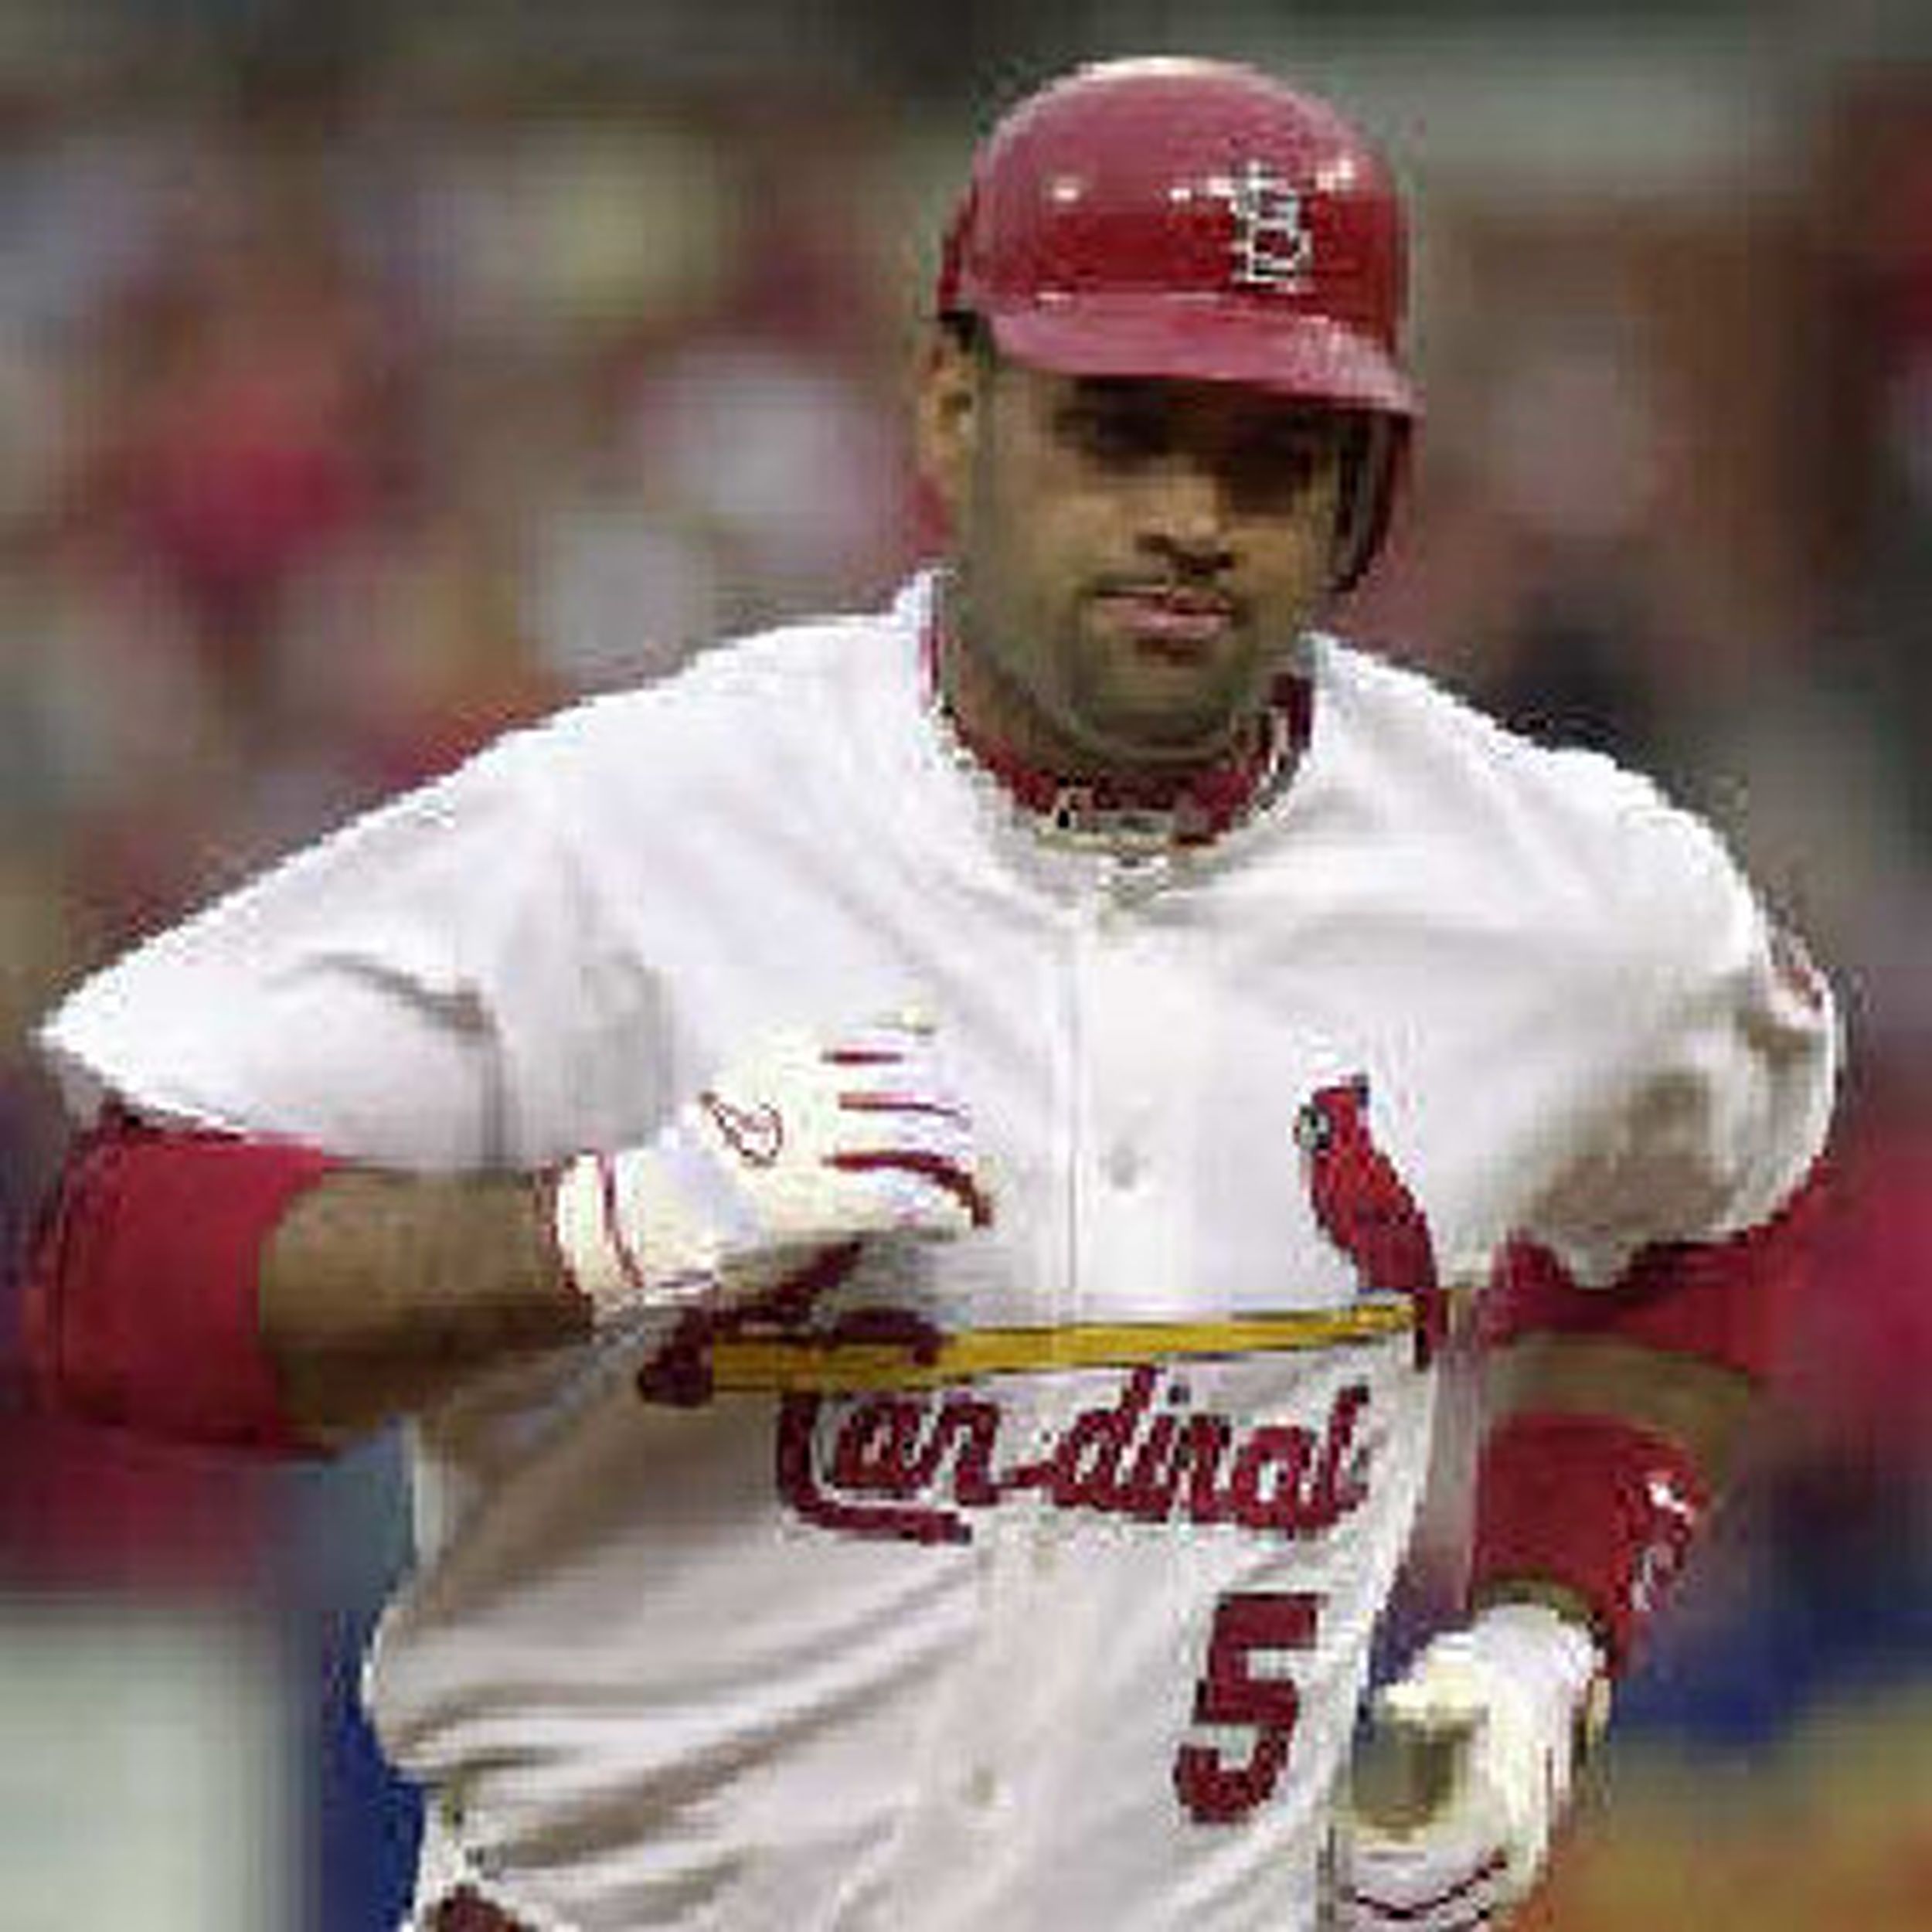 MLB on X: Albert Pujols won 3 MVP Awards and made 11 All-Star Games. “La  Máquina” was a two-time World Series champion and won the Roberto Clemente  Award in 2008. Pujols and